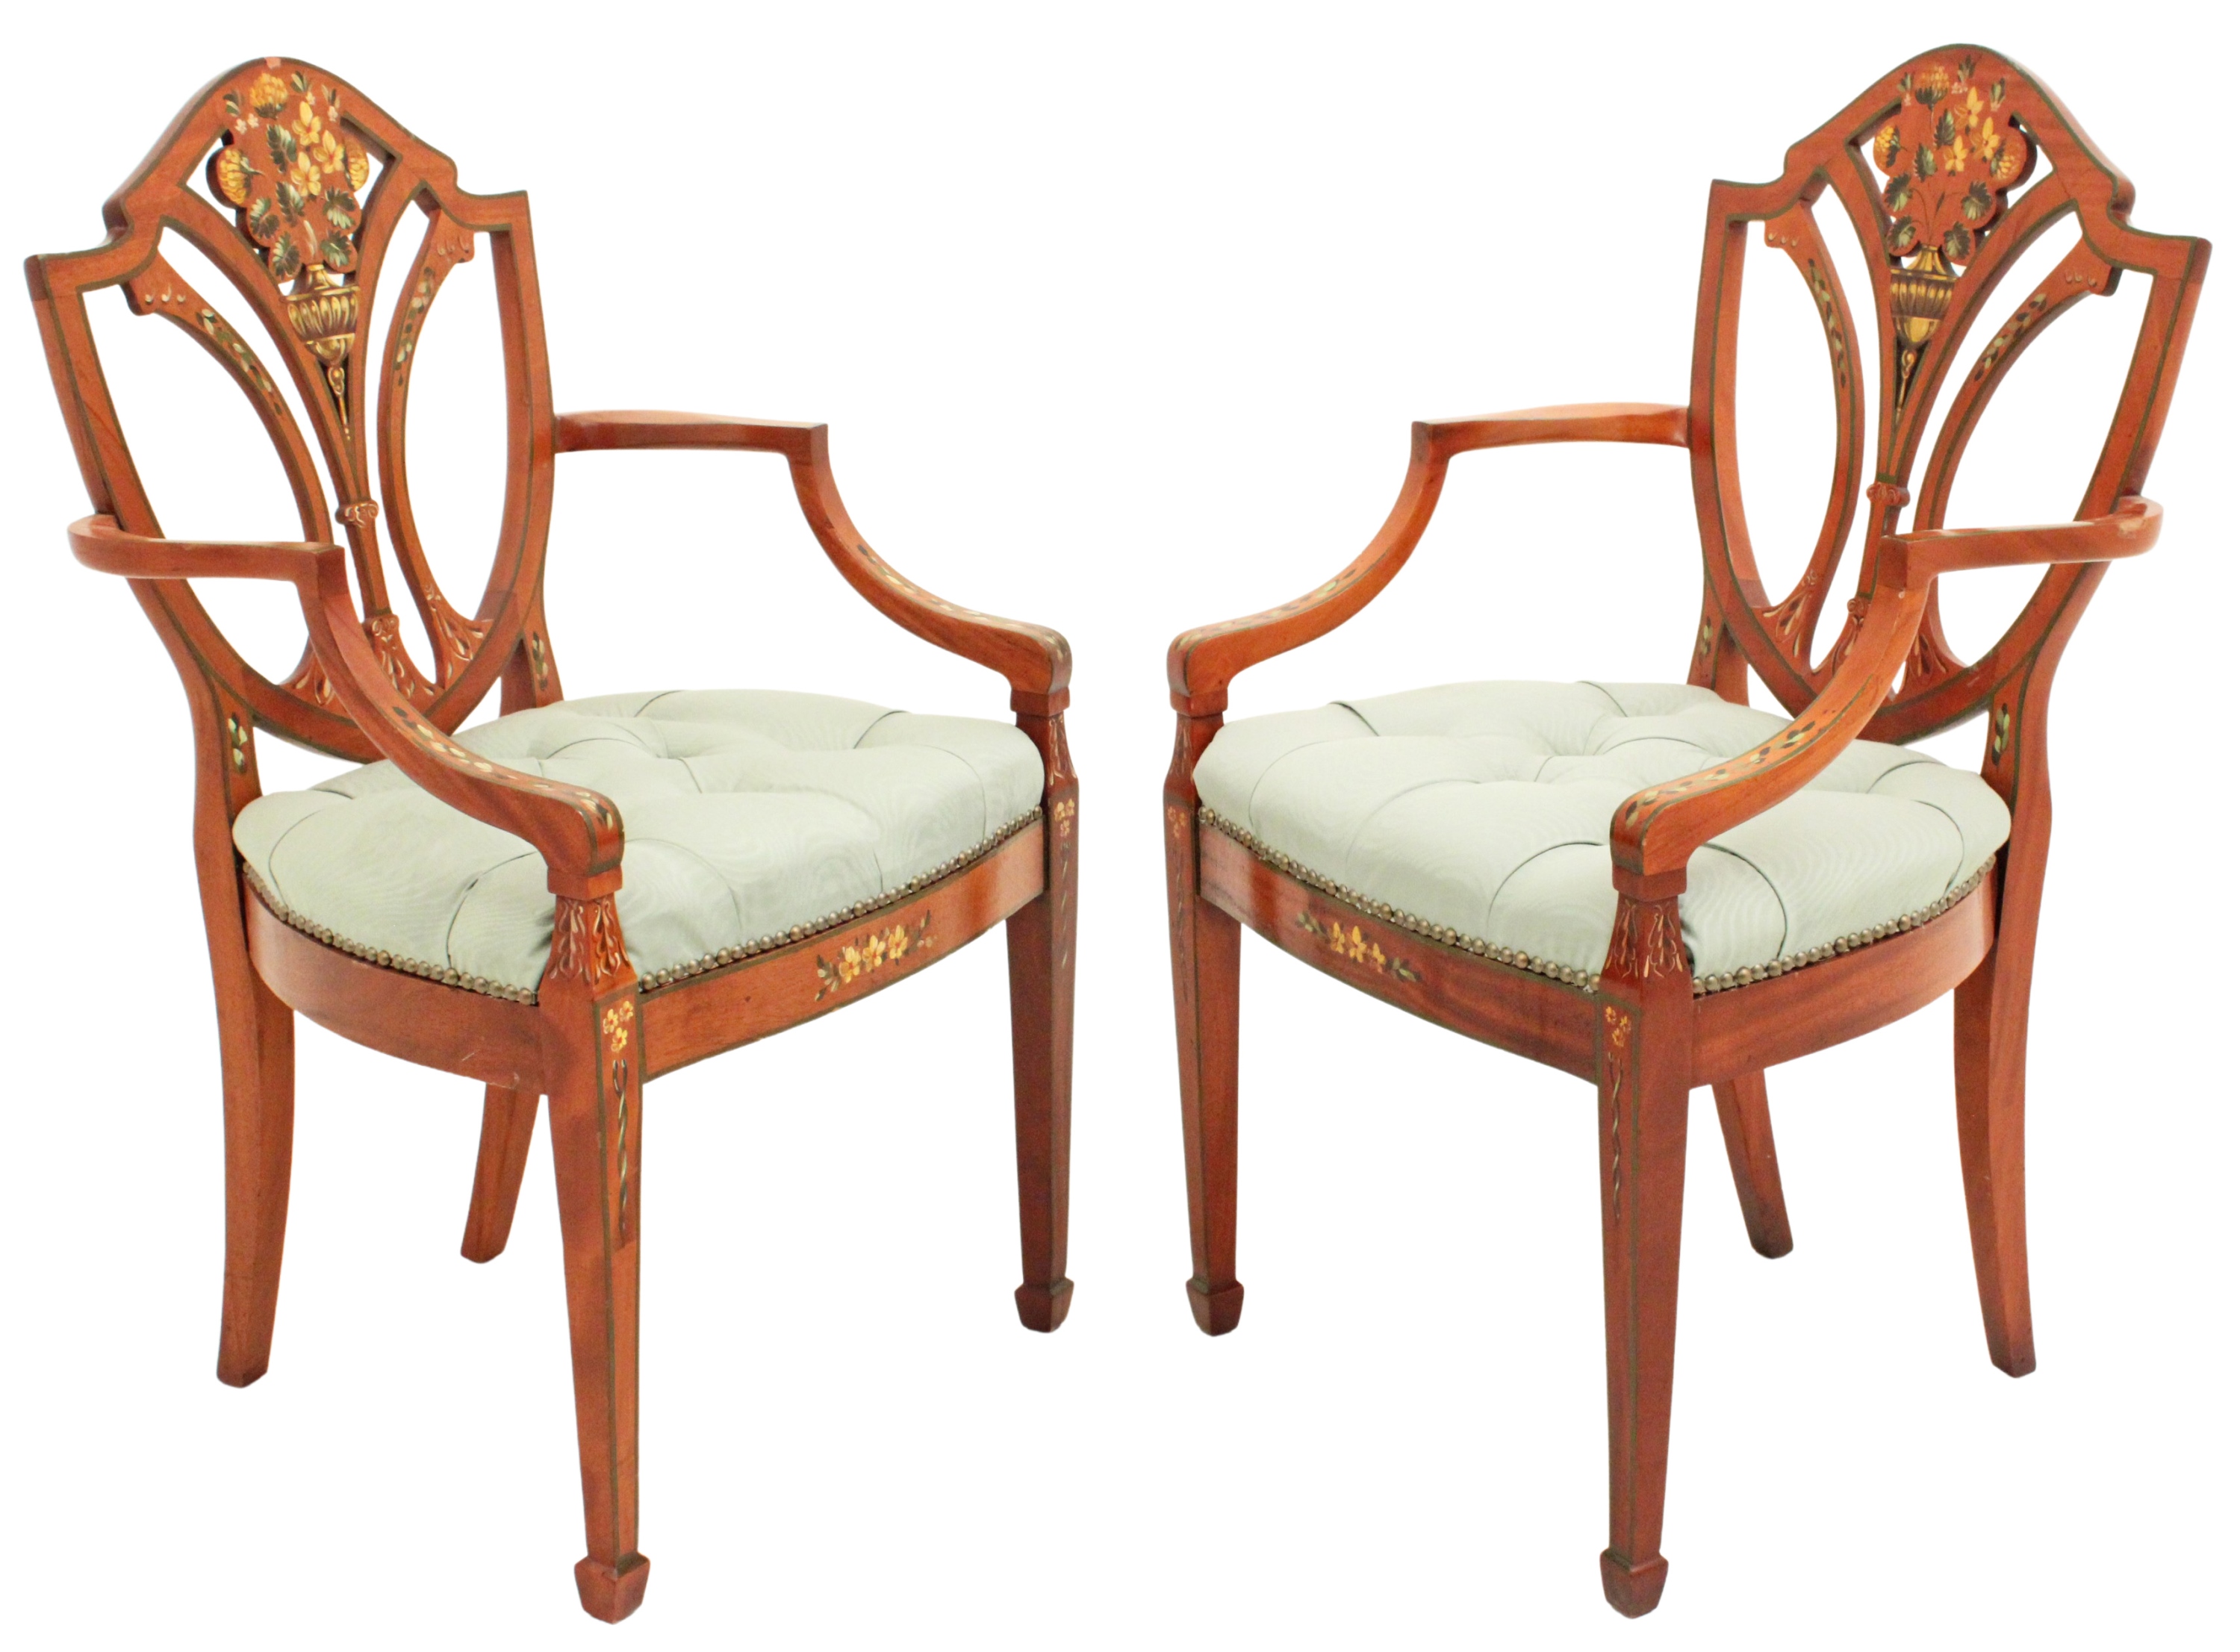 PR OF PAINTED SATINWOOD ARM CHAIRS 2f8e93